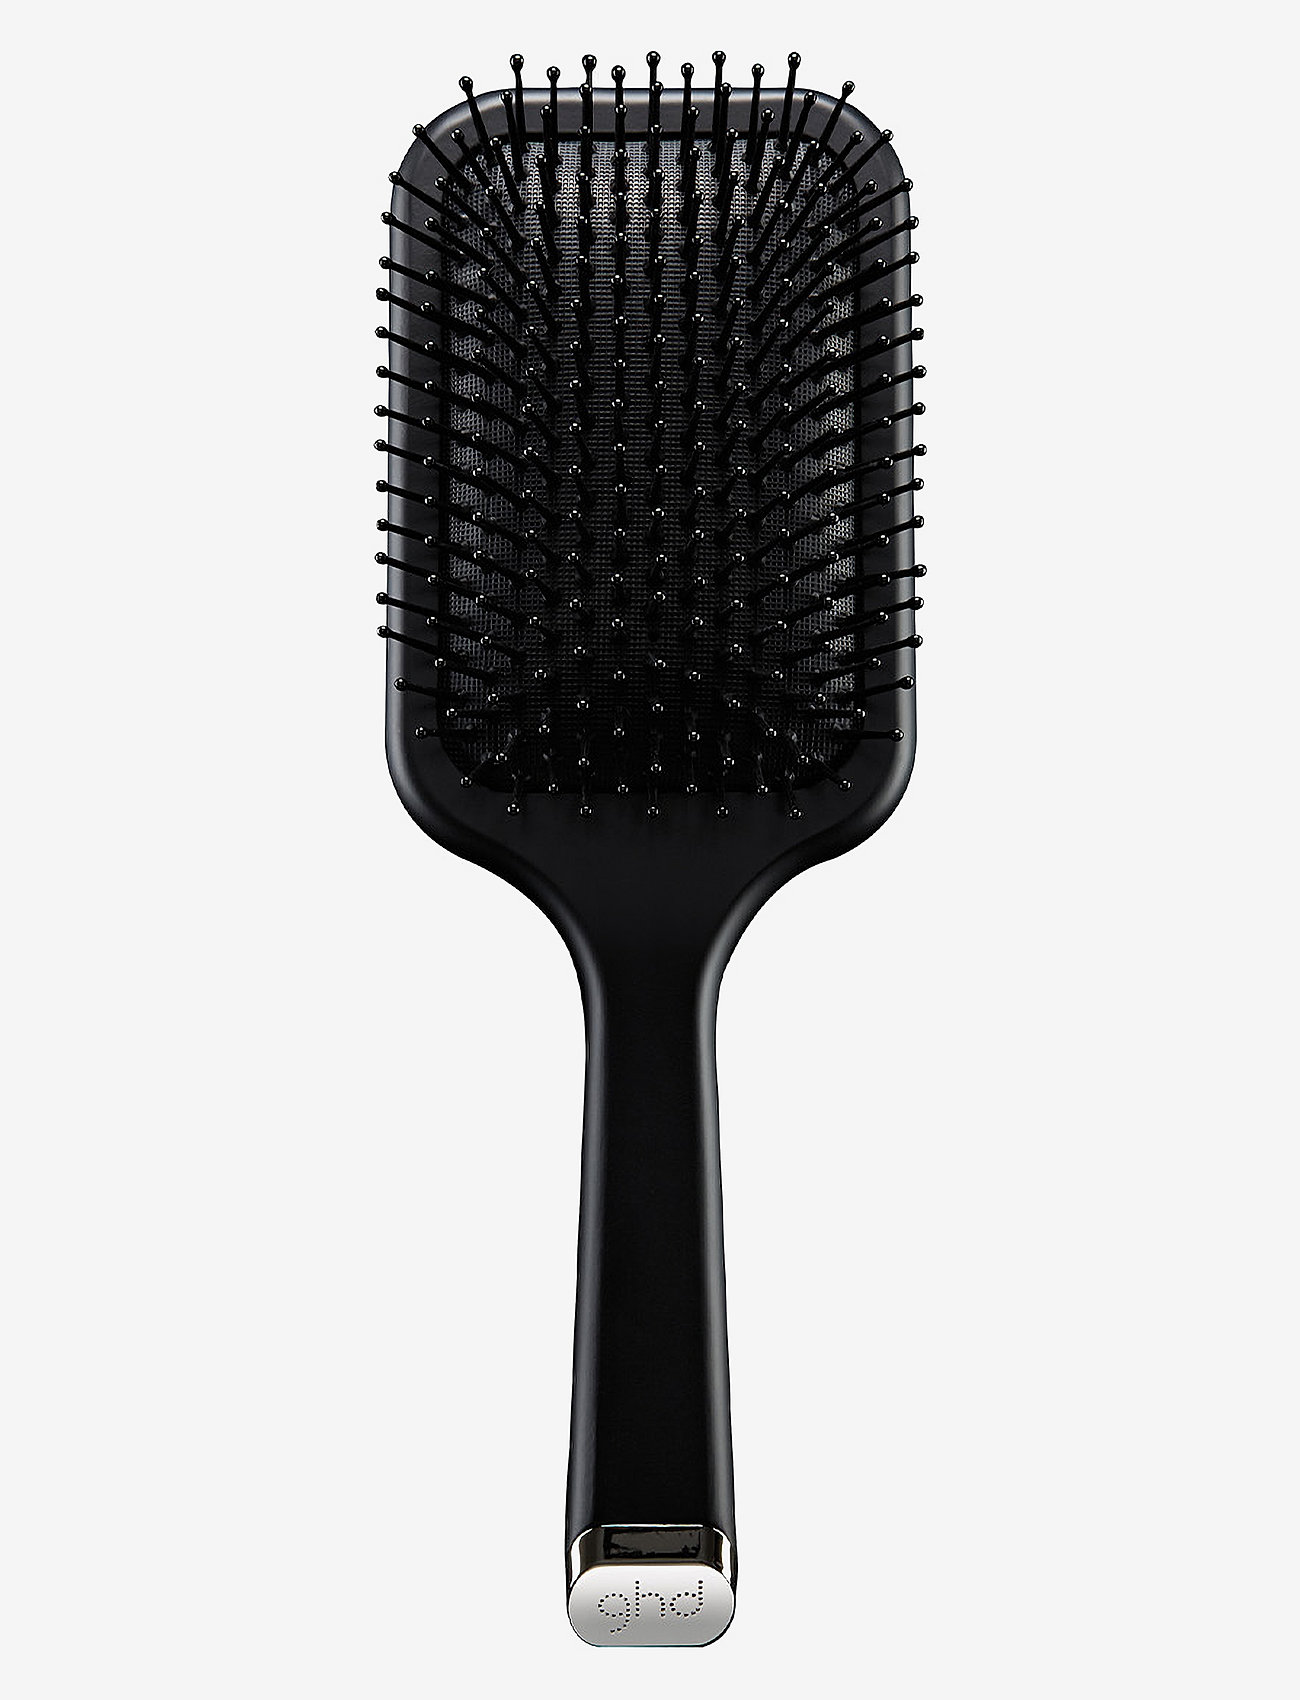 ghd - ghd The All-Rounder Paddle Brush - lapioharjat - black - 1